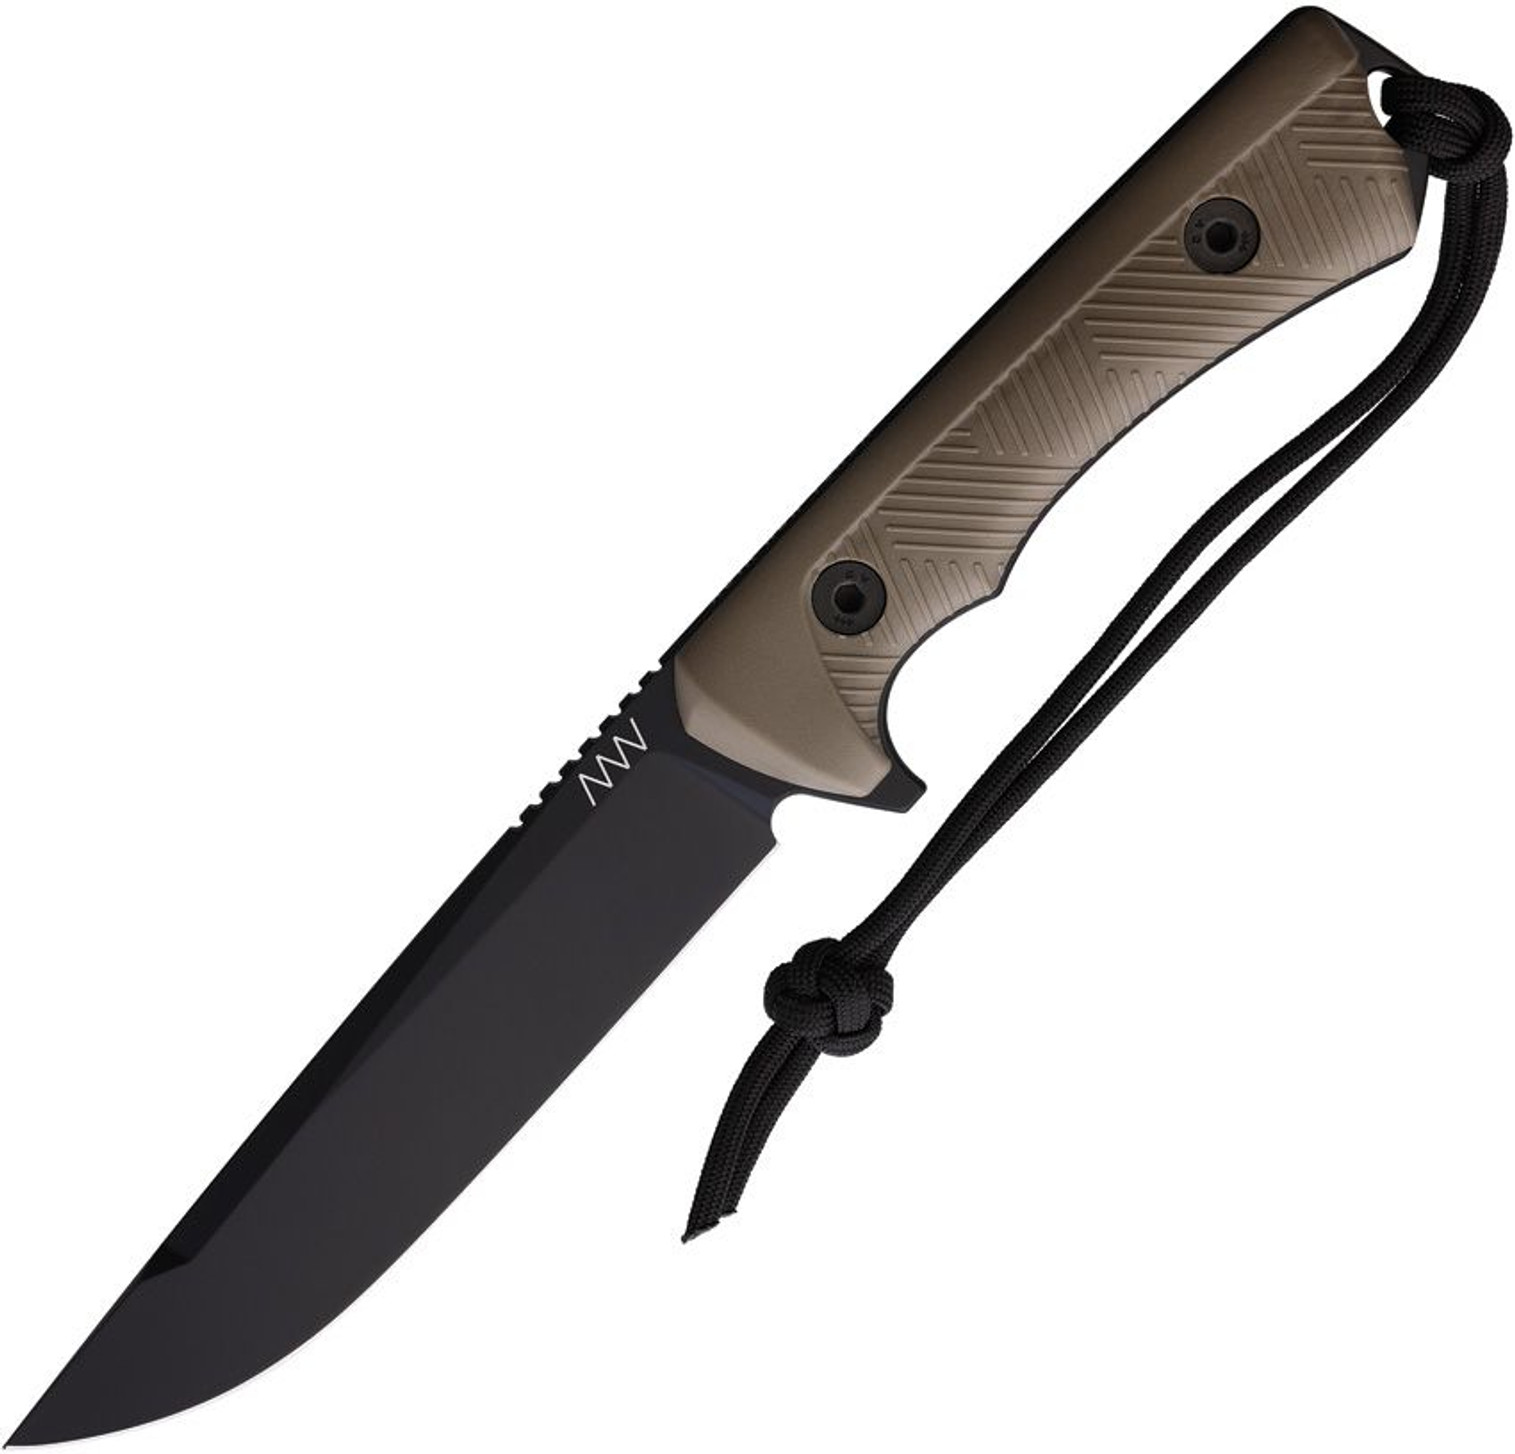 P300 Fixed Blade Blk/Coy